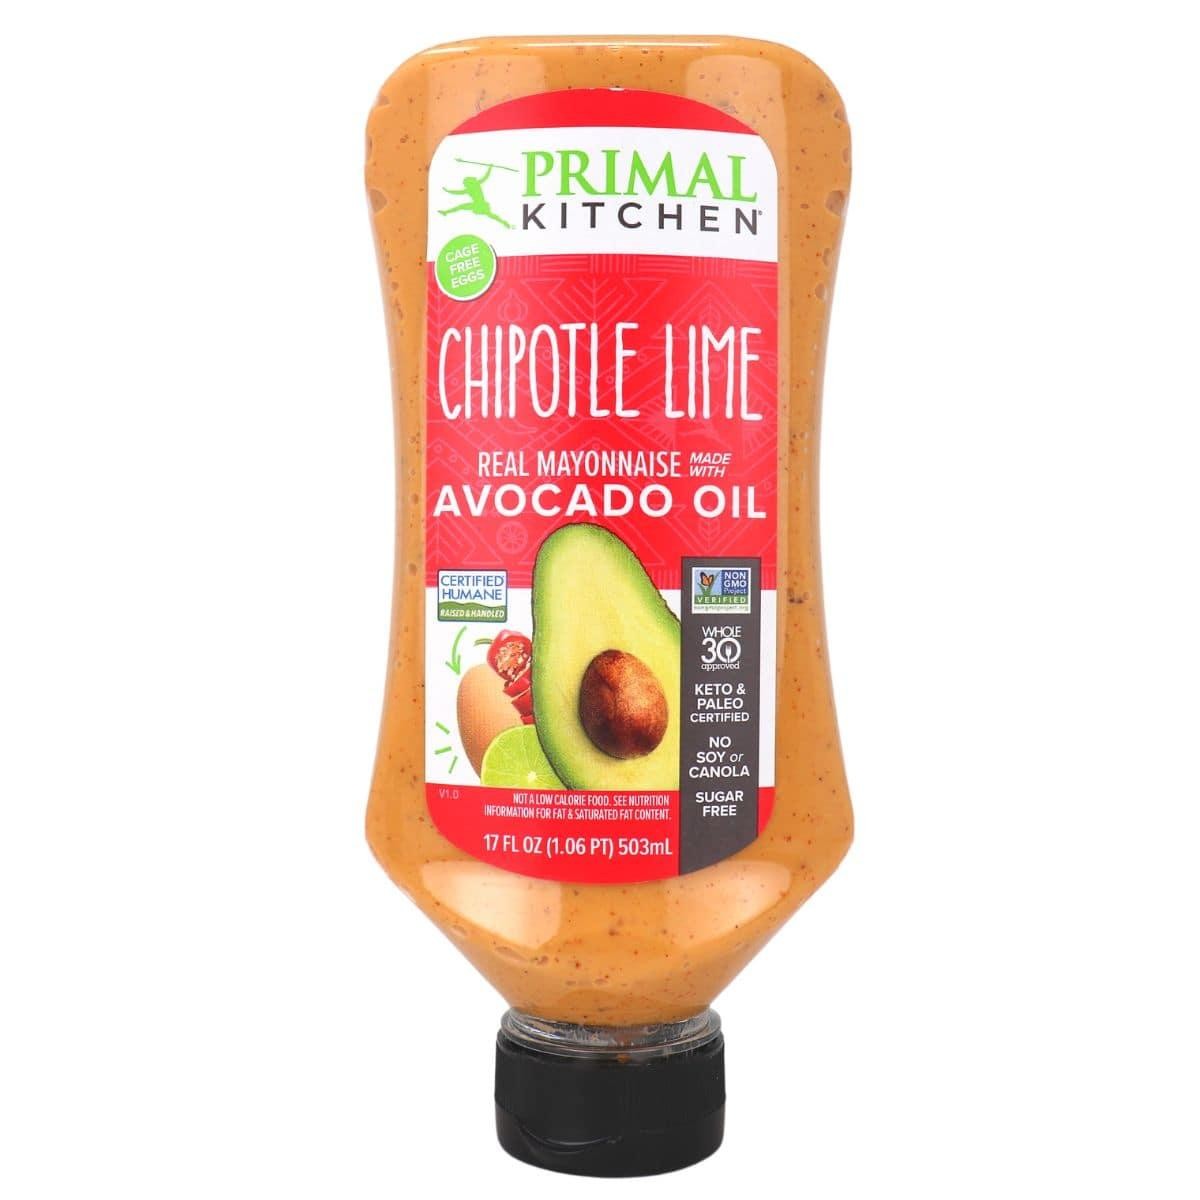 Primal Kitchen Chipotle Lime Mayo Made With Avocado Oil - 17 Fl Oz